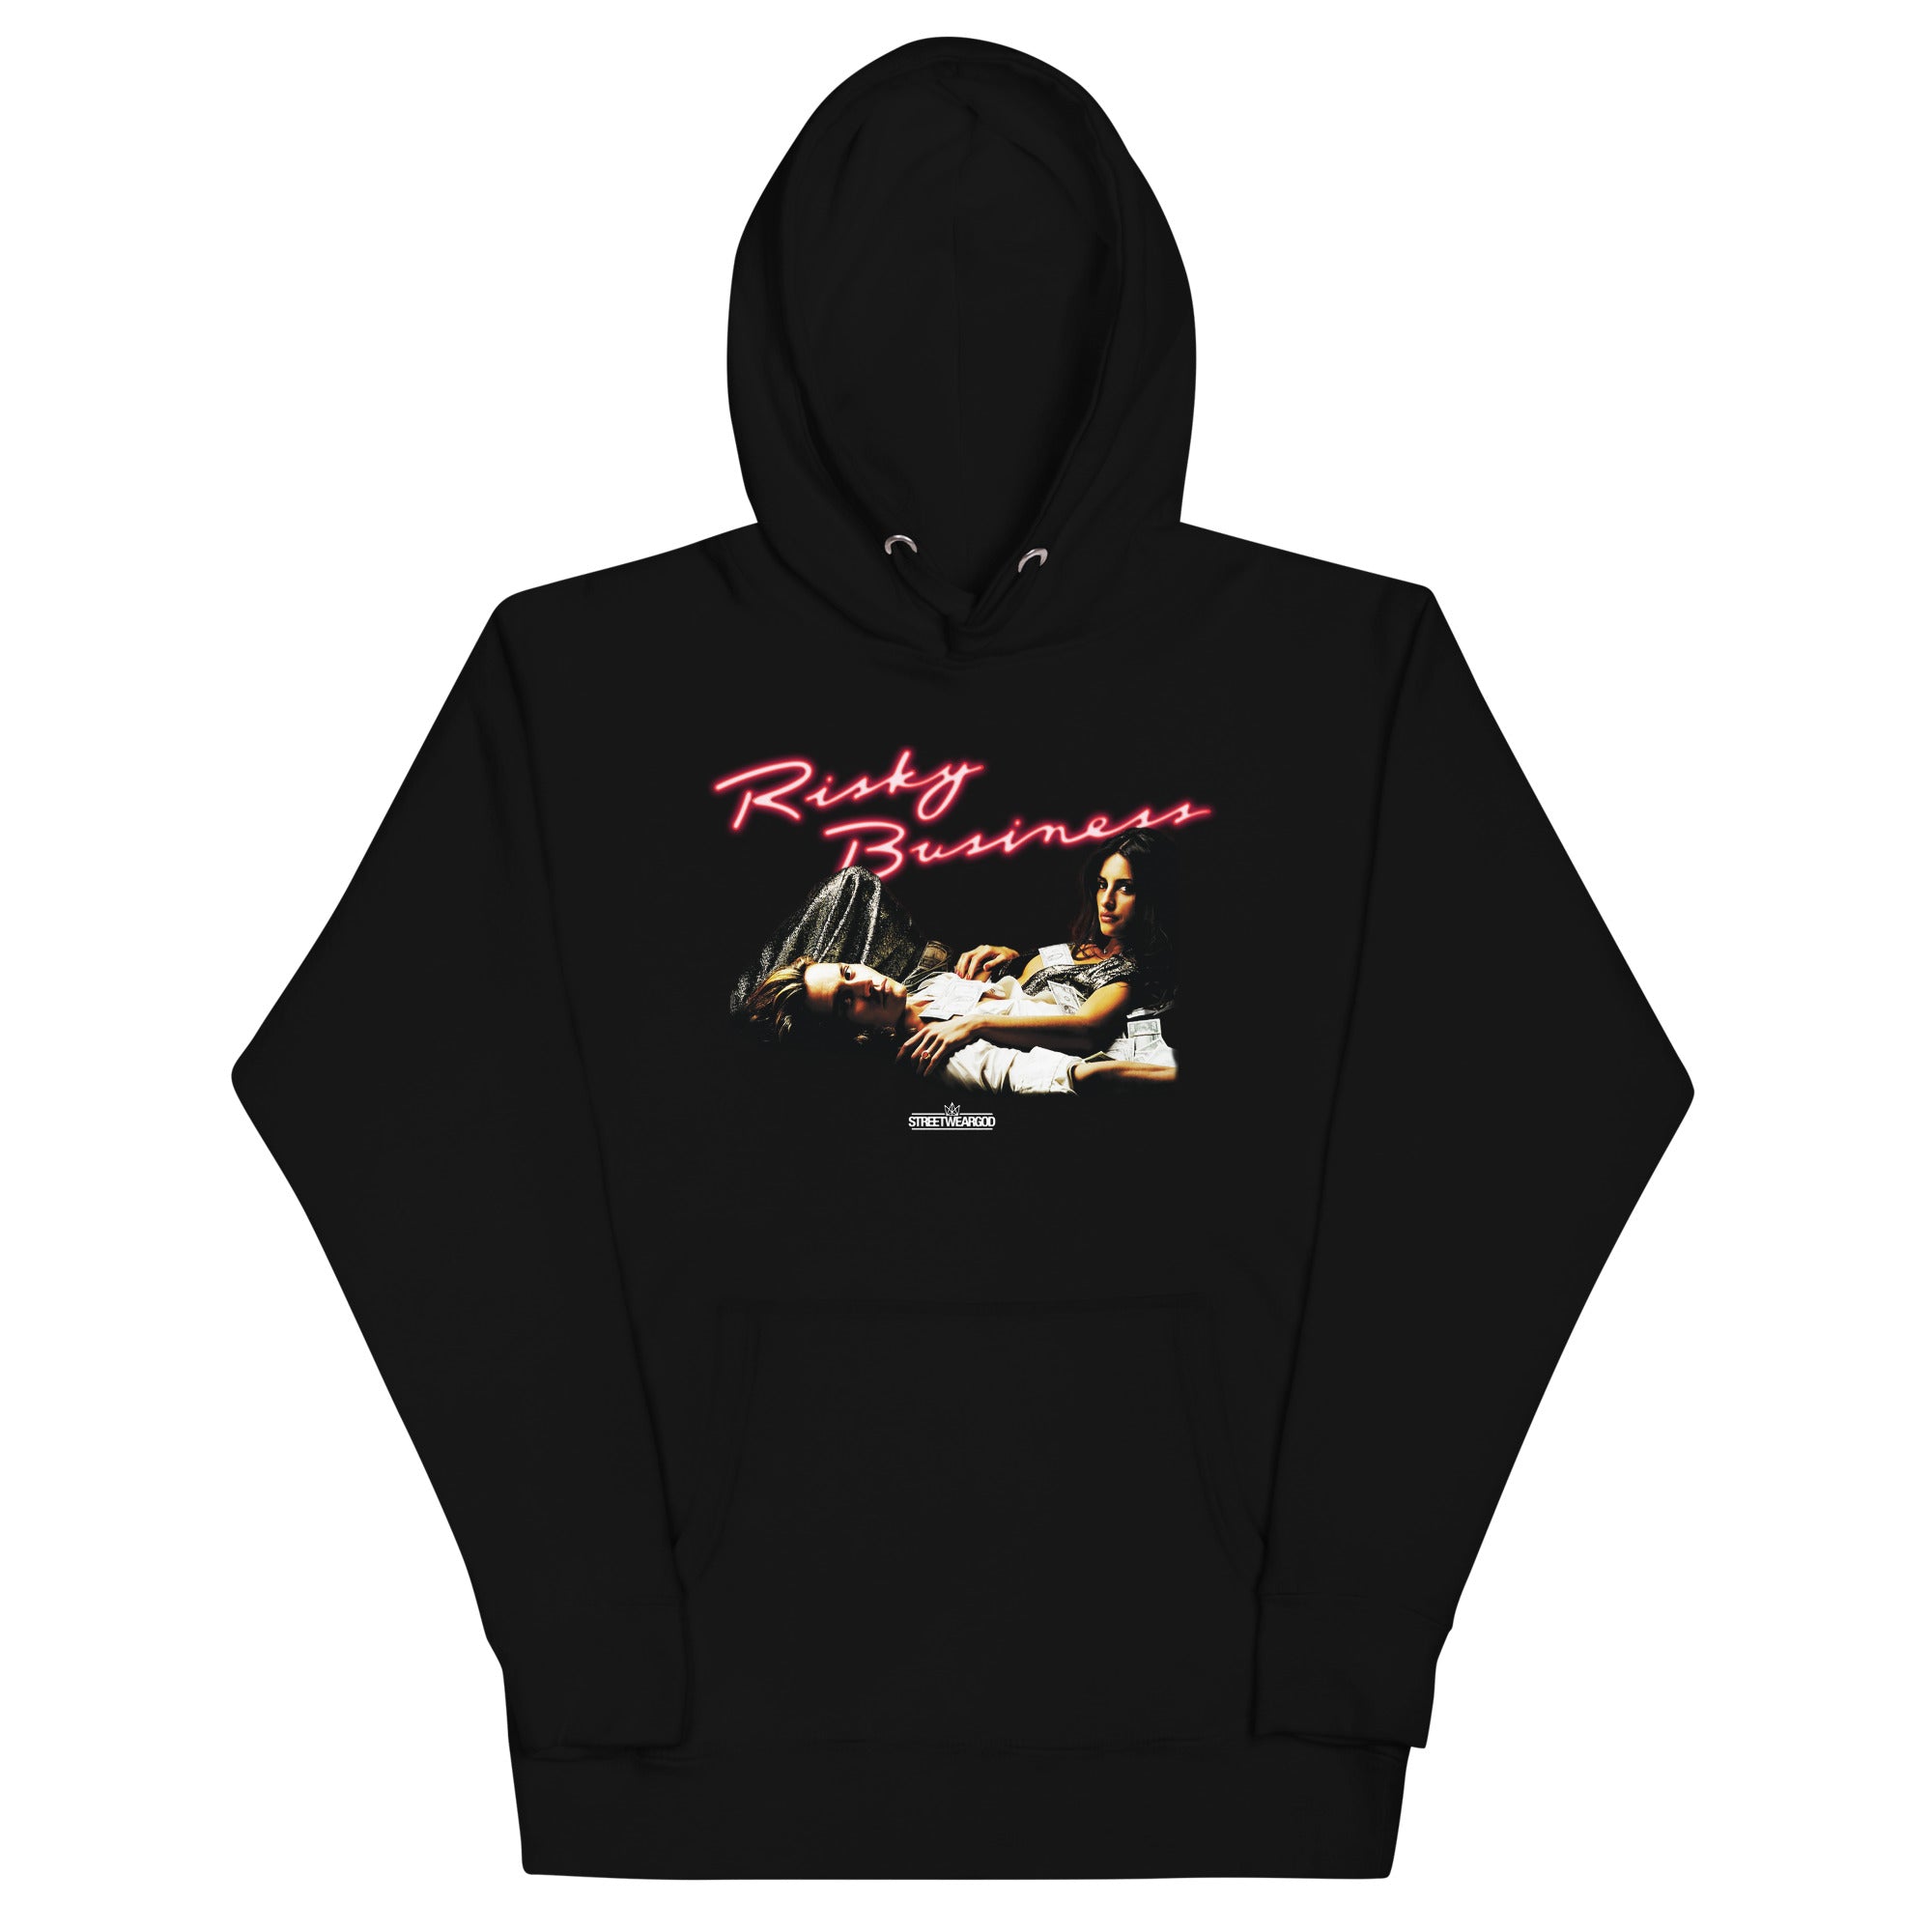 BLOW IS RISKY BUSINESS Hoodie